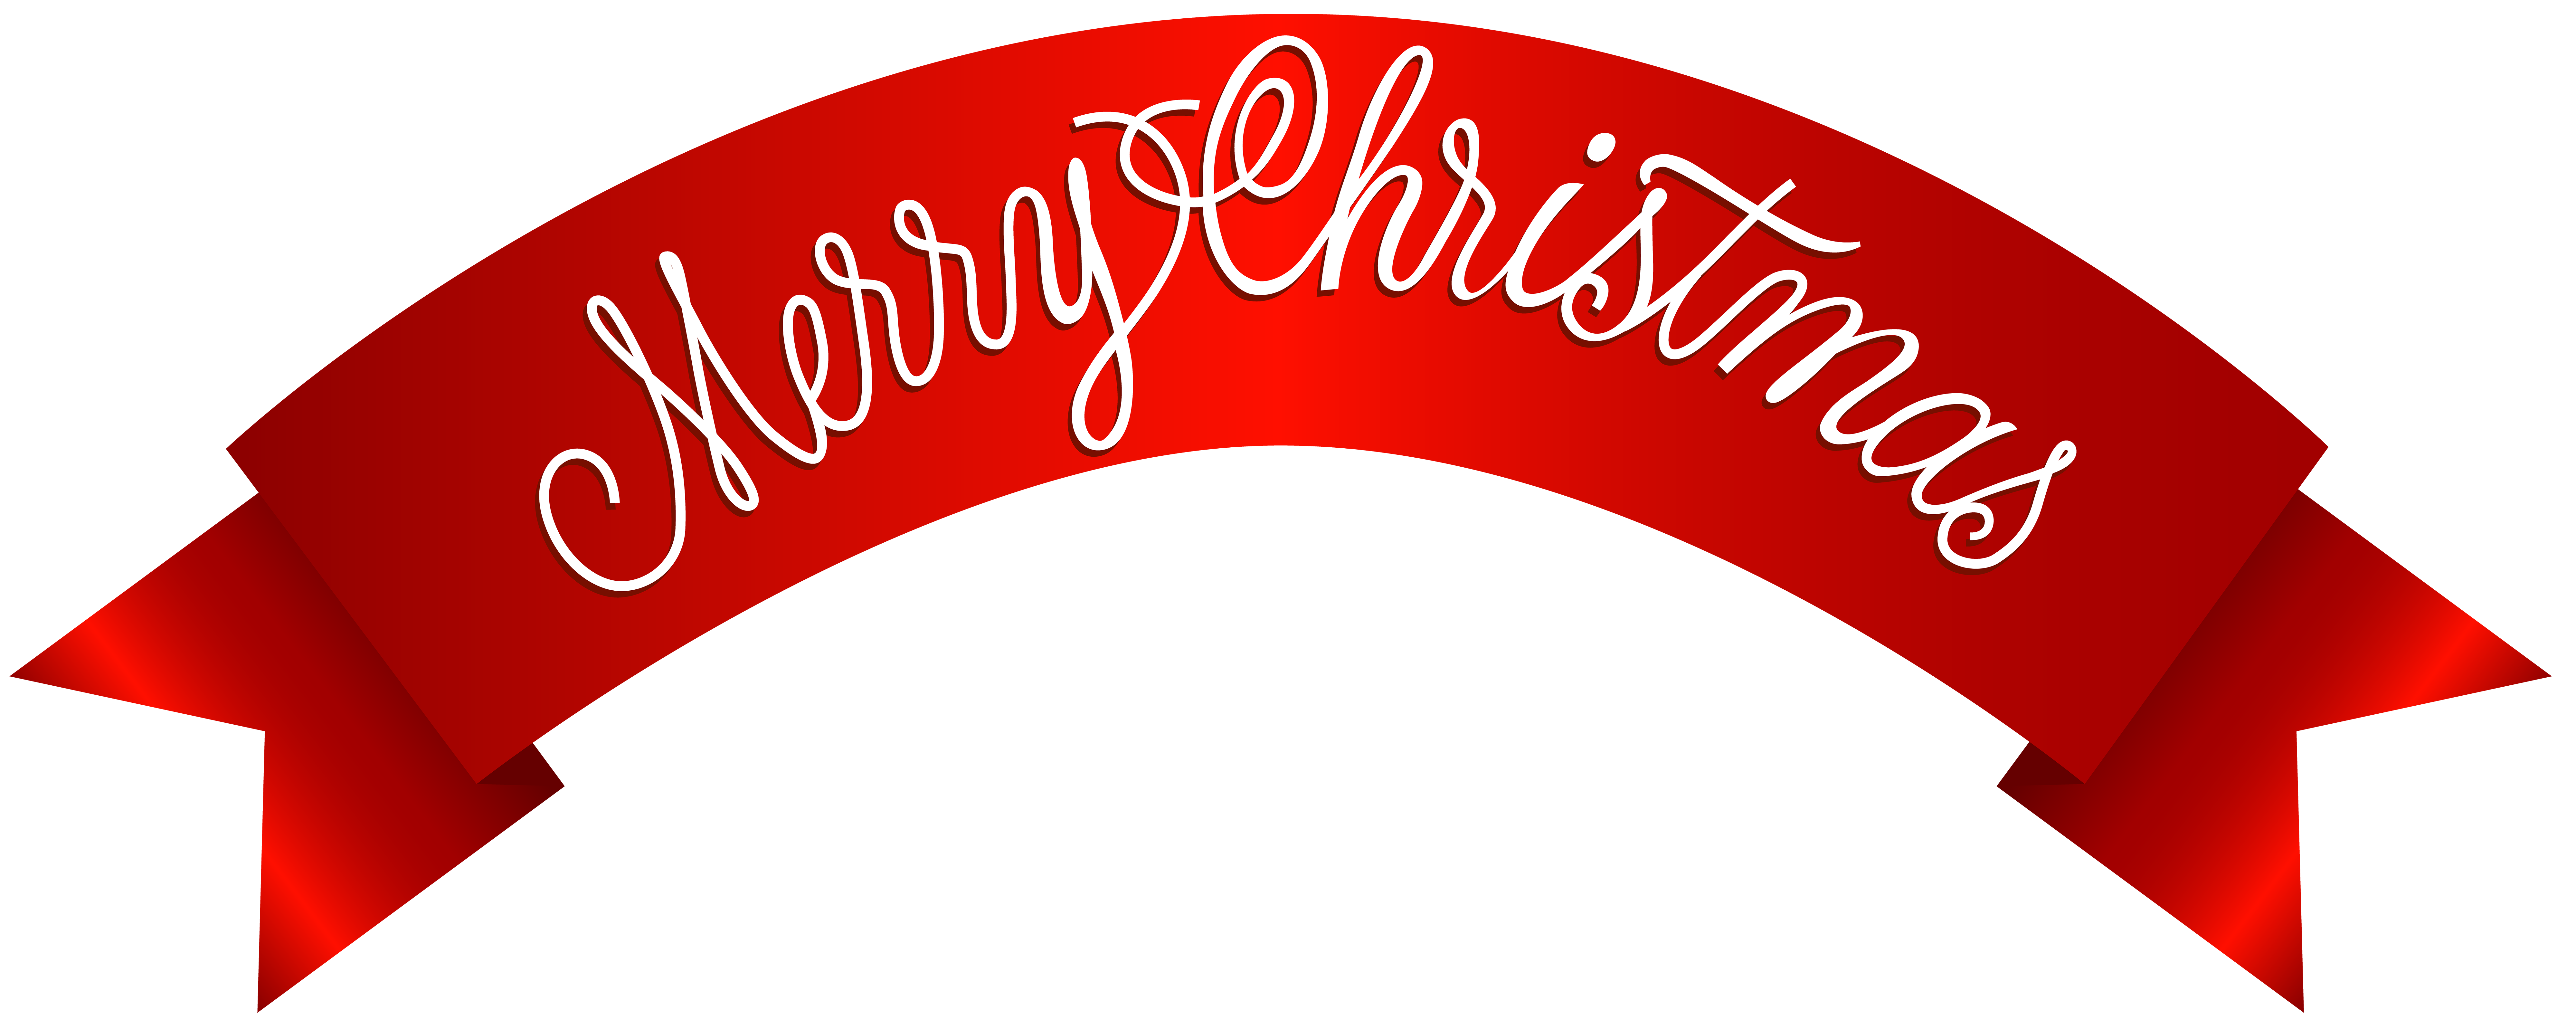 Merry Christmas Banner PNG Clip Art Image.